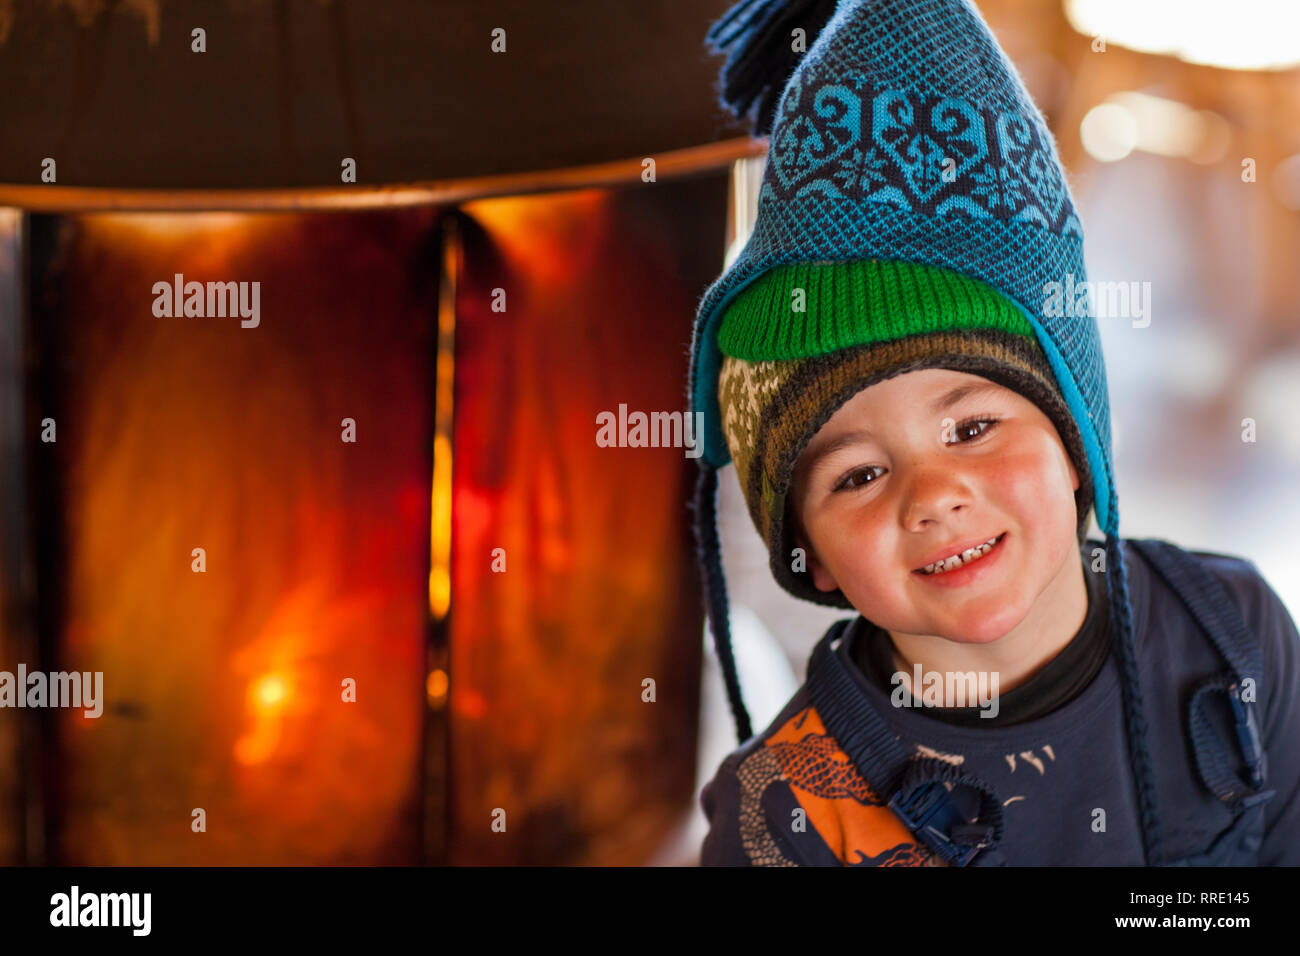 Portrait of a smiling young boy wearing three knitted hats inside a cabin. Stock Photo